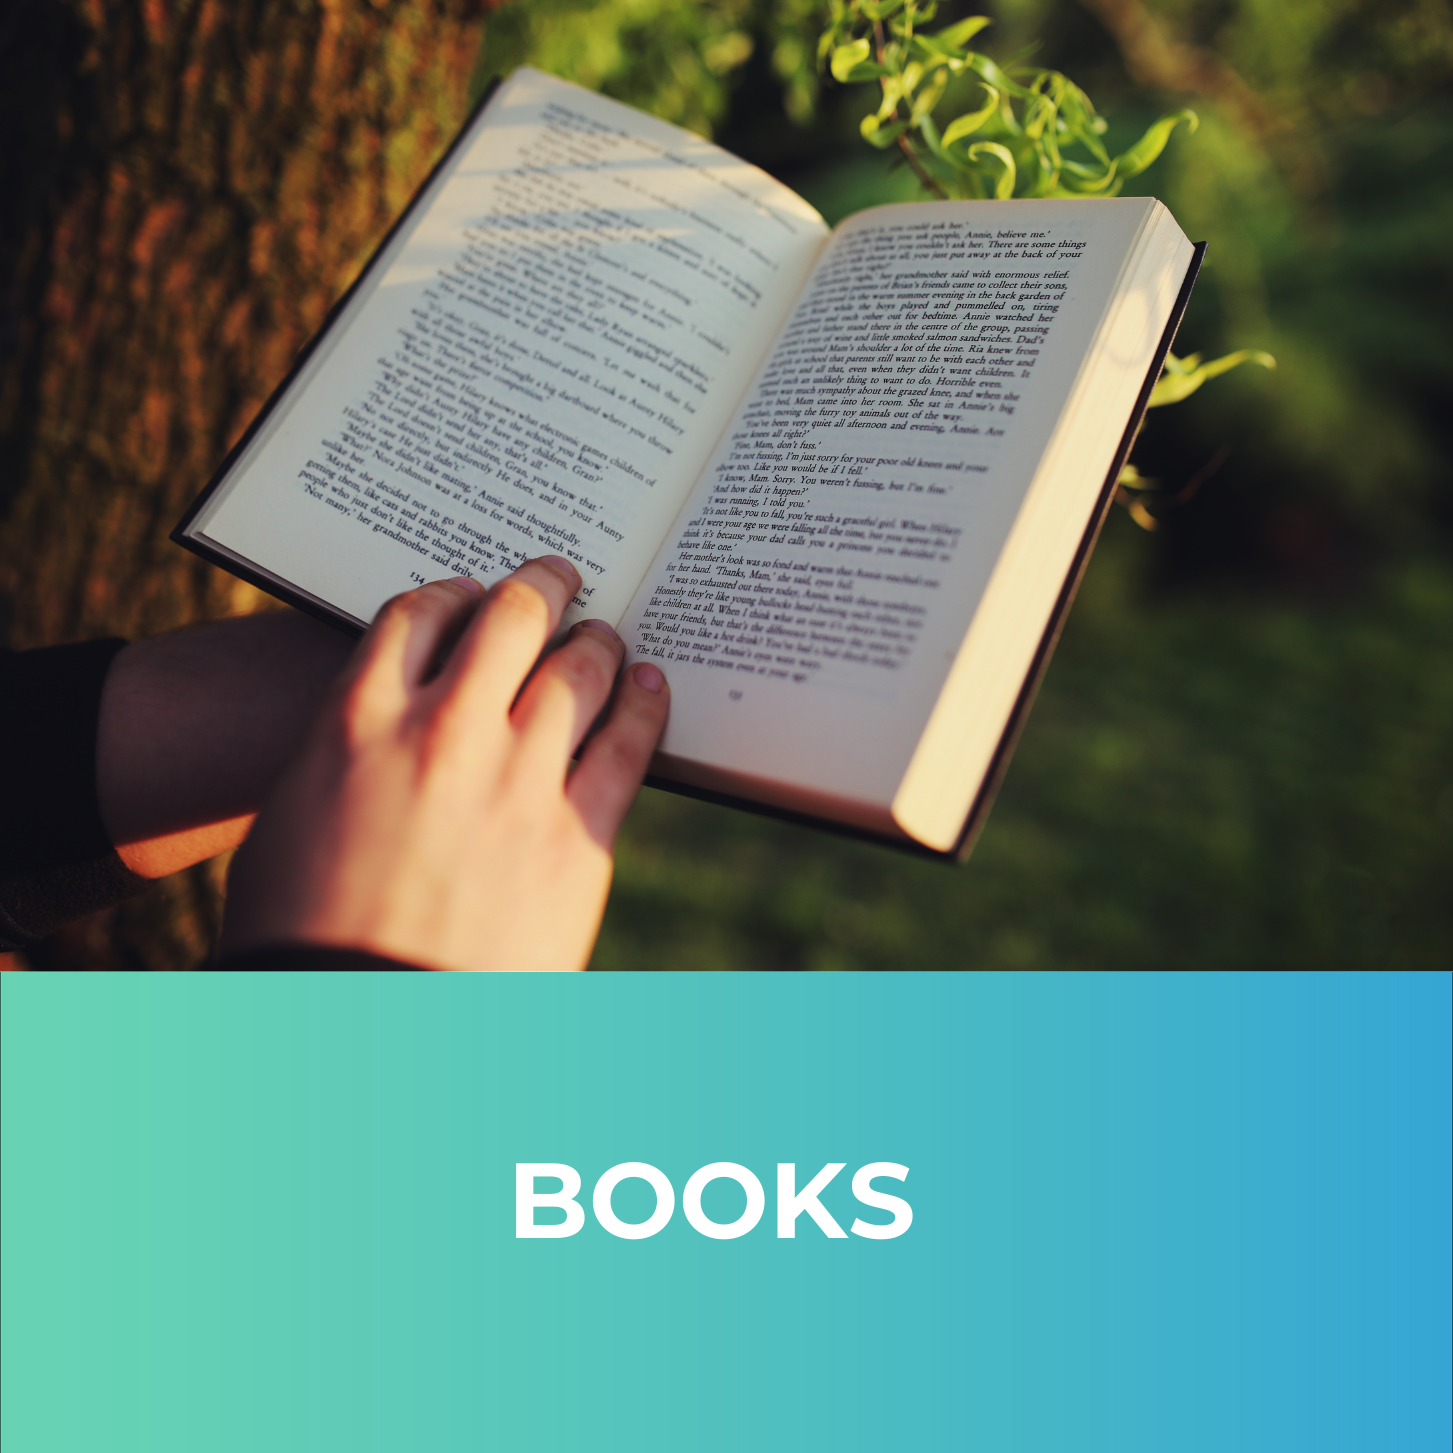  Do you want to learn more about business decarbonisation, corporate sustainability and ESG strategy? Or are you curious about climate solutions and other aspects of environmental protection? Check out eevie’s recommendations for books.   